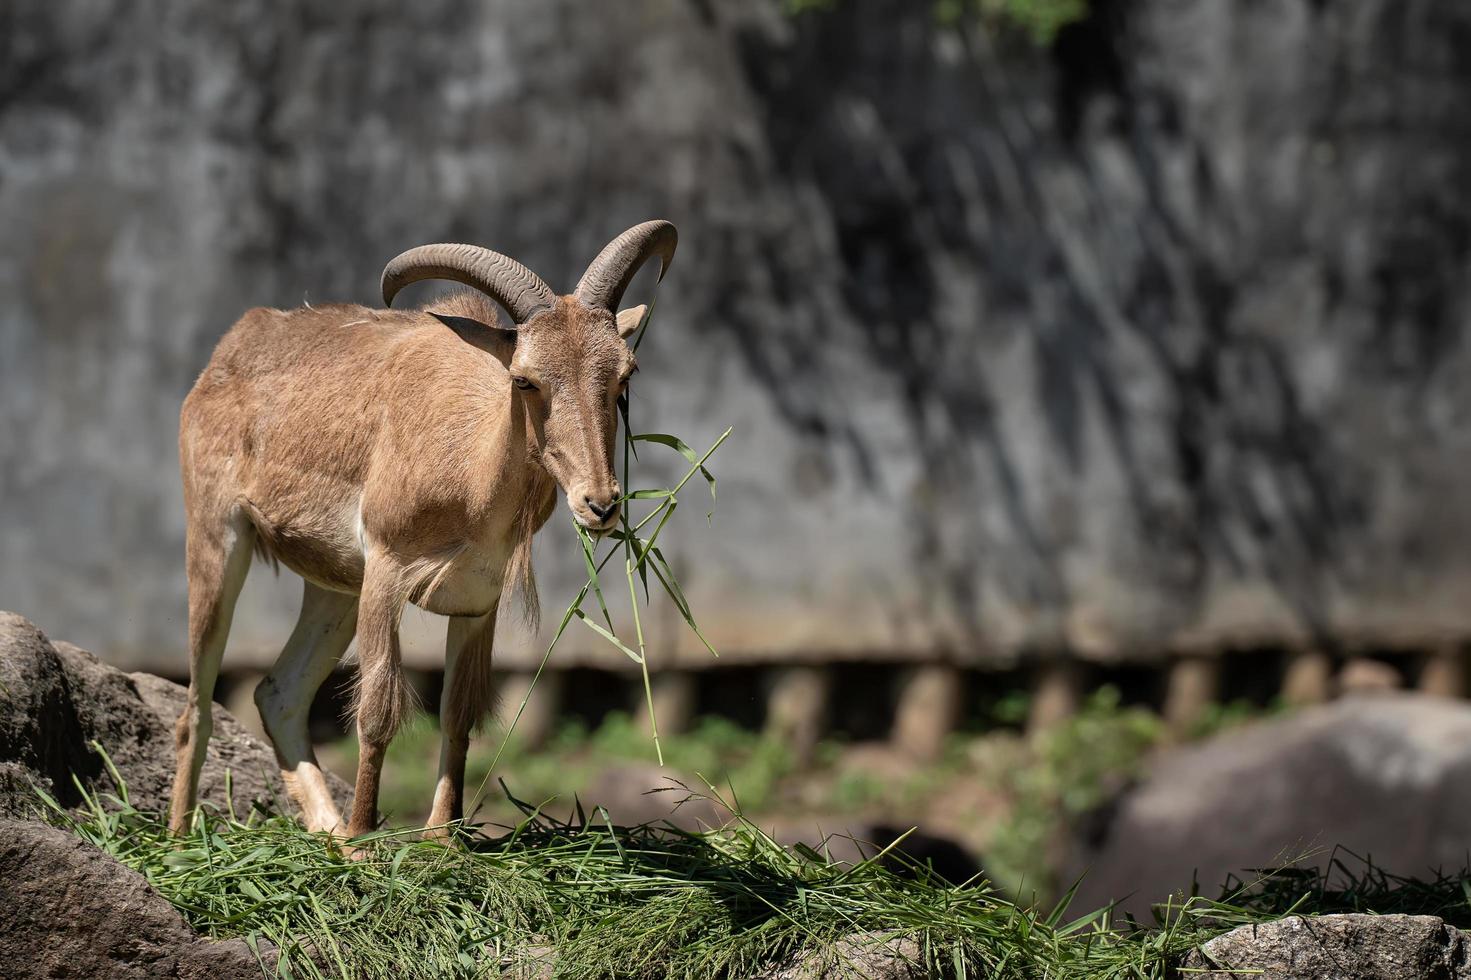 Barbary sheep or Ammotragus lervia  or aoudad  ,brown barbary sheep standing on stone ,Animal conservation and protecting ecosystems concept. photo